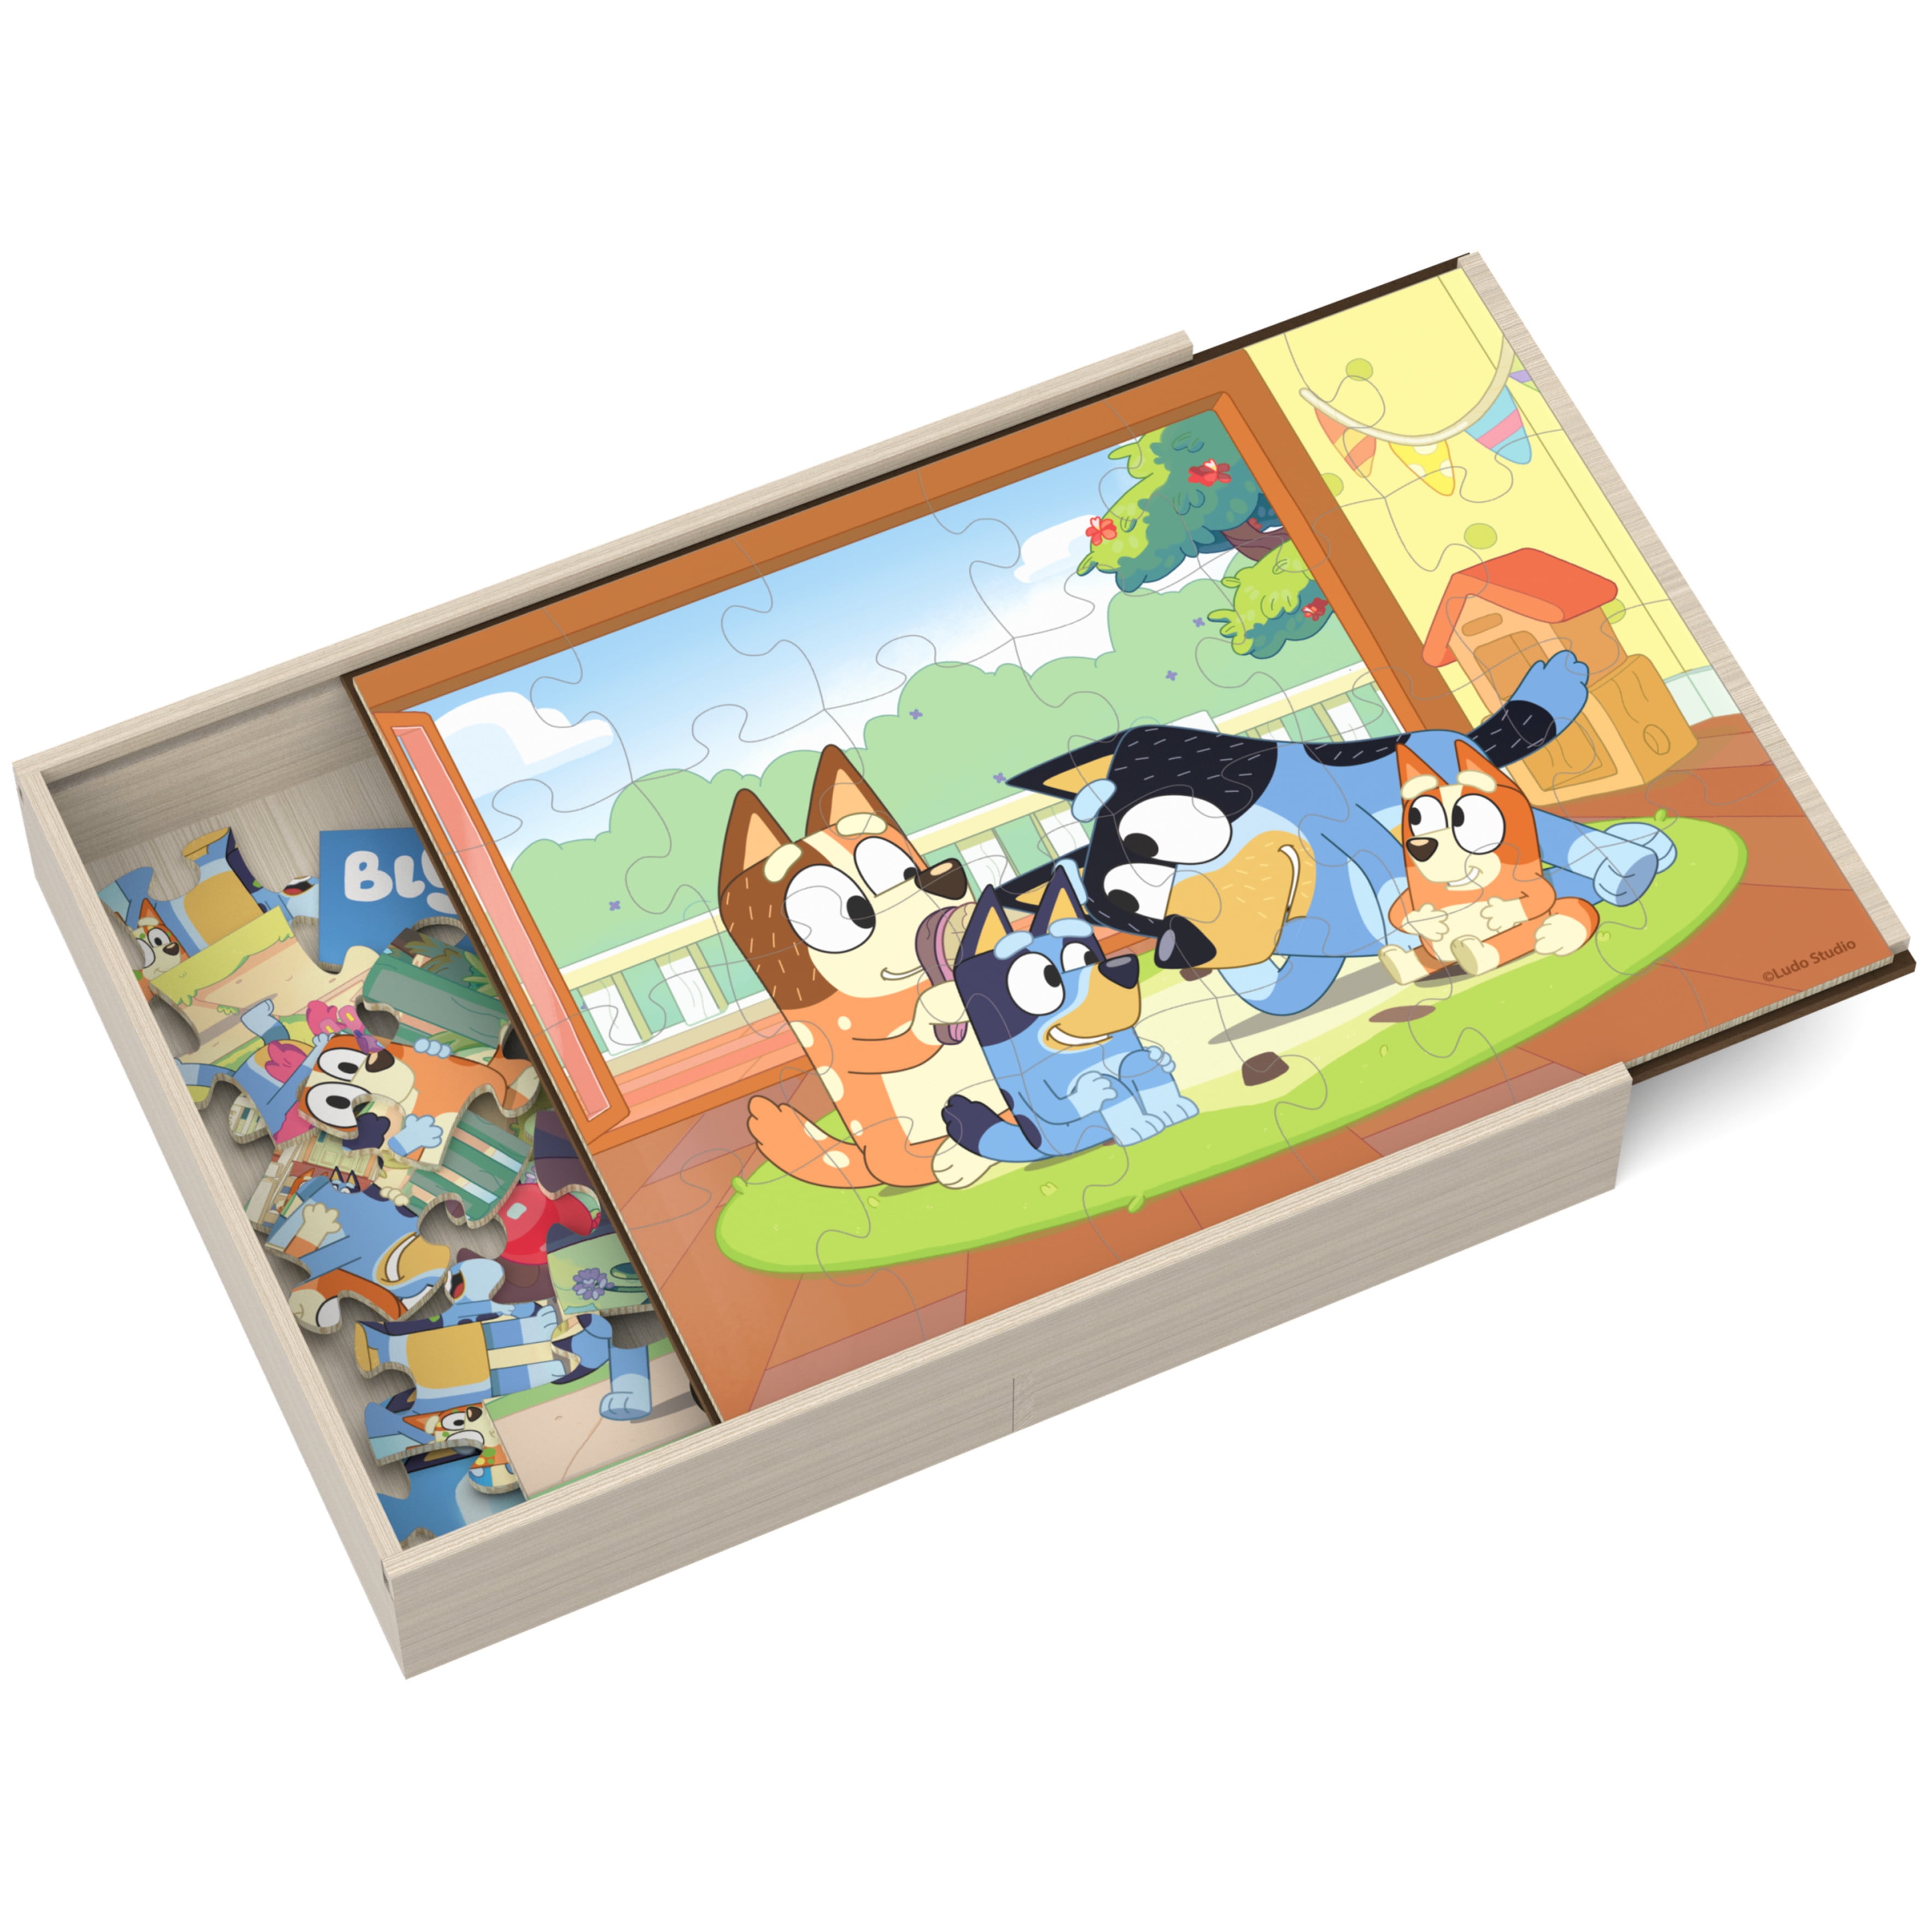 BLUEY 5 Wood Puzzles in Wooden Storage Box NEW 2021 Sealed